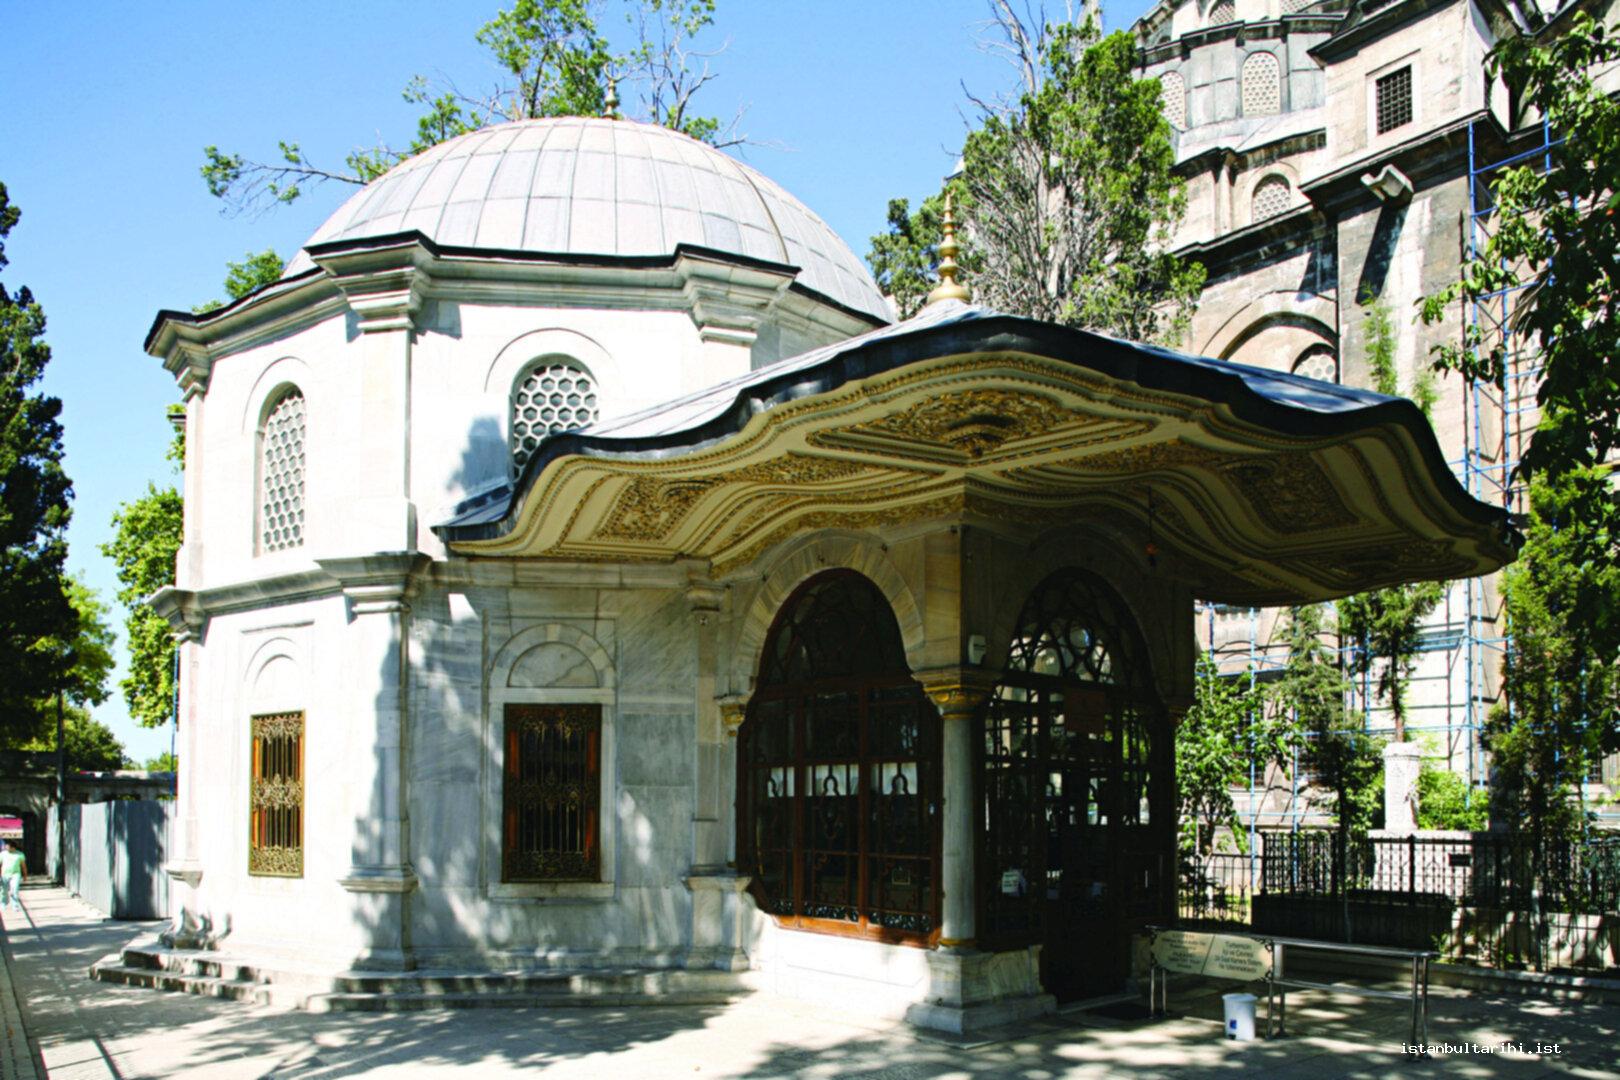 36- The outer view of Sultan Mehmed II’s tomb